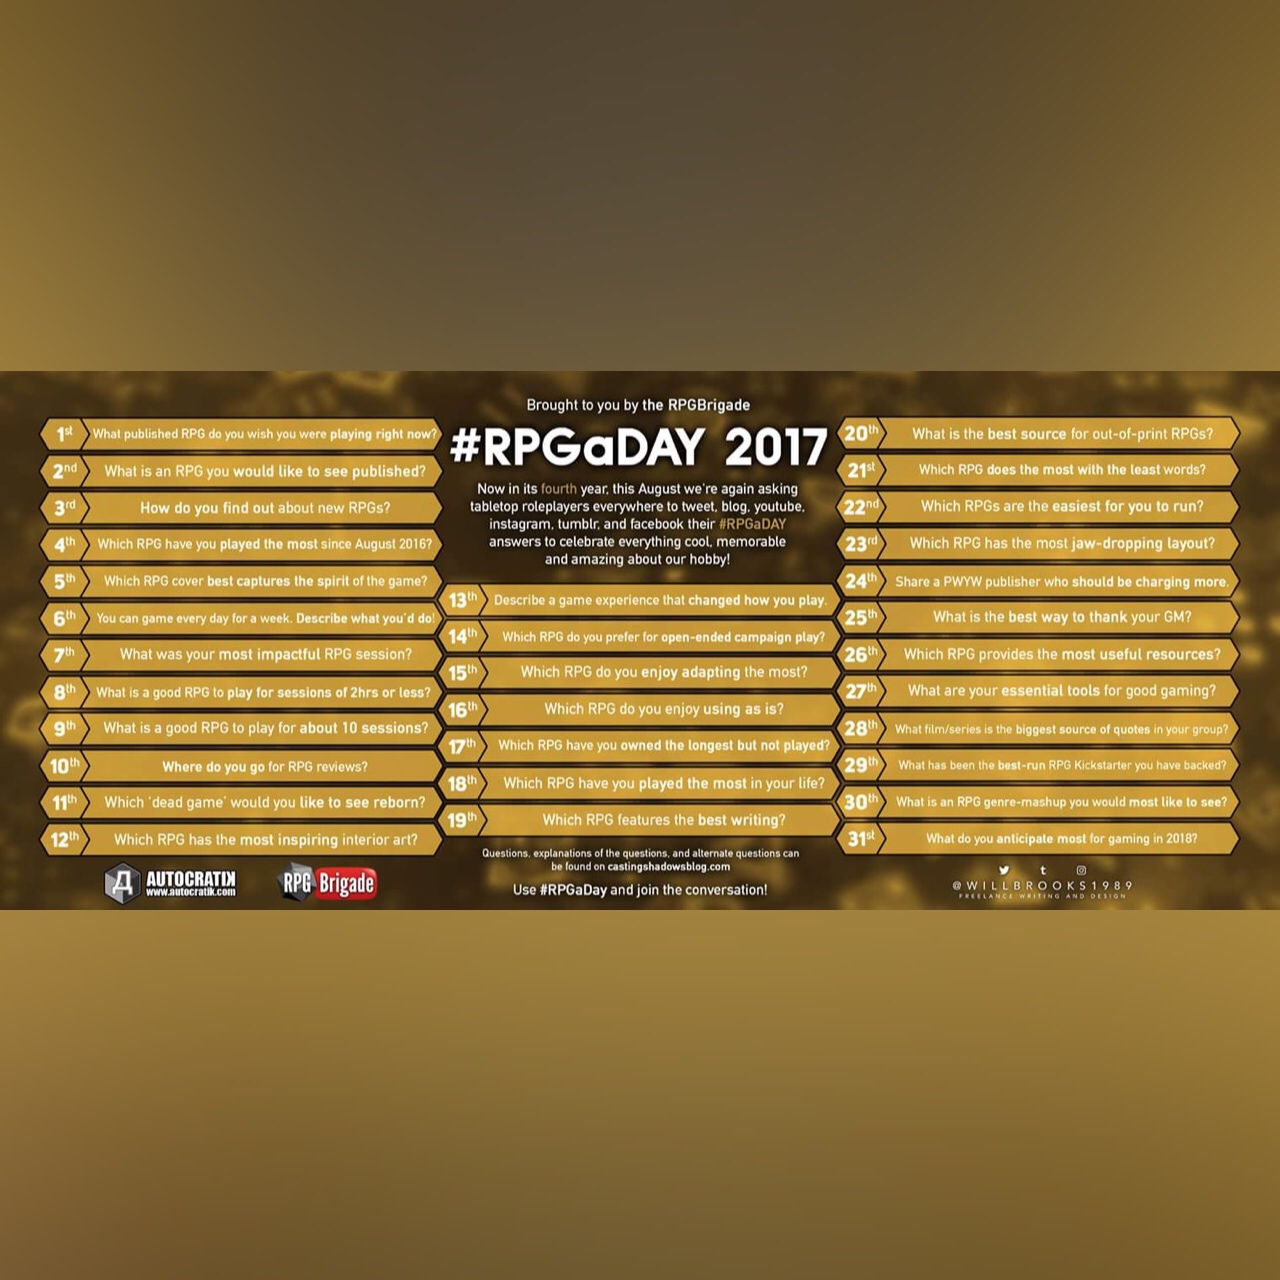 RPGaDAY 2017 August 7th What was your most impactful RPG session? 